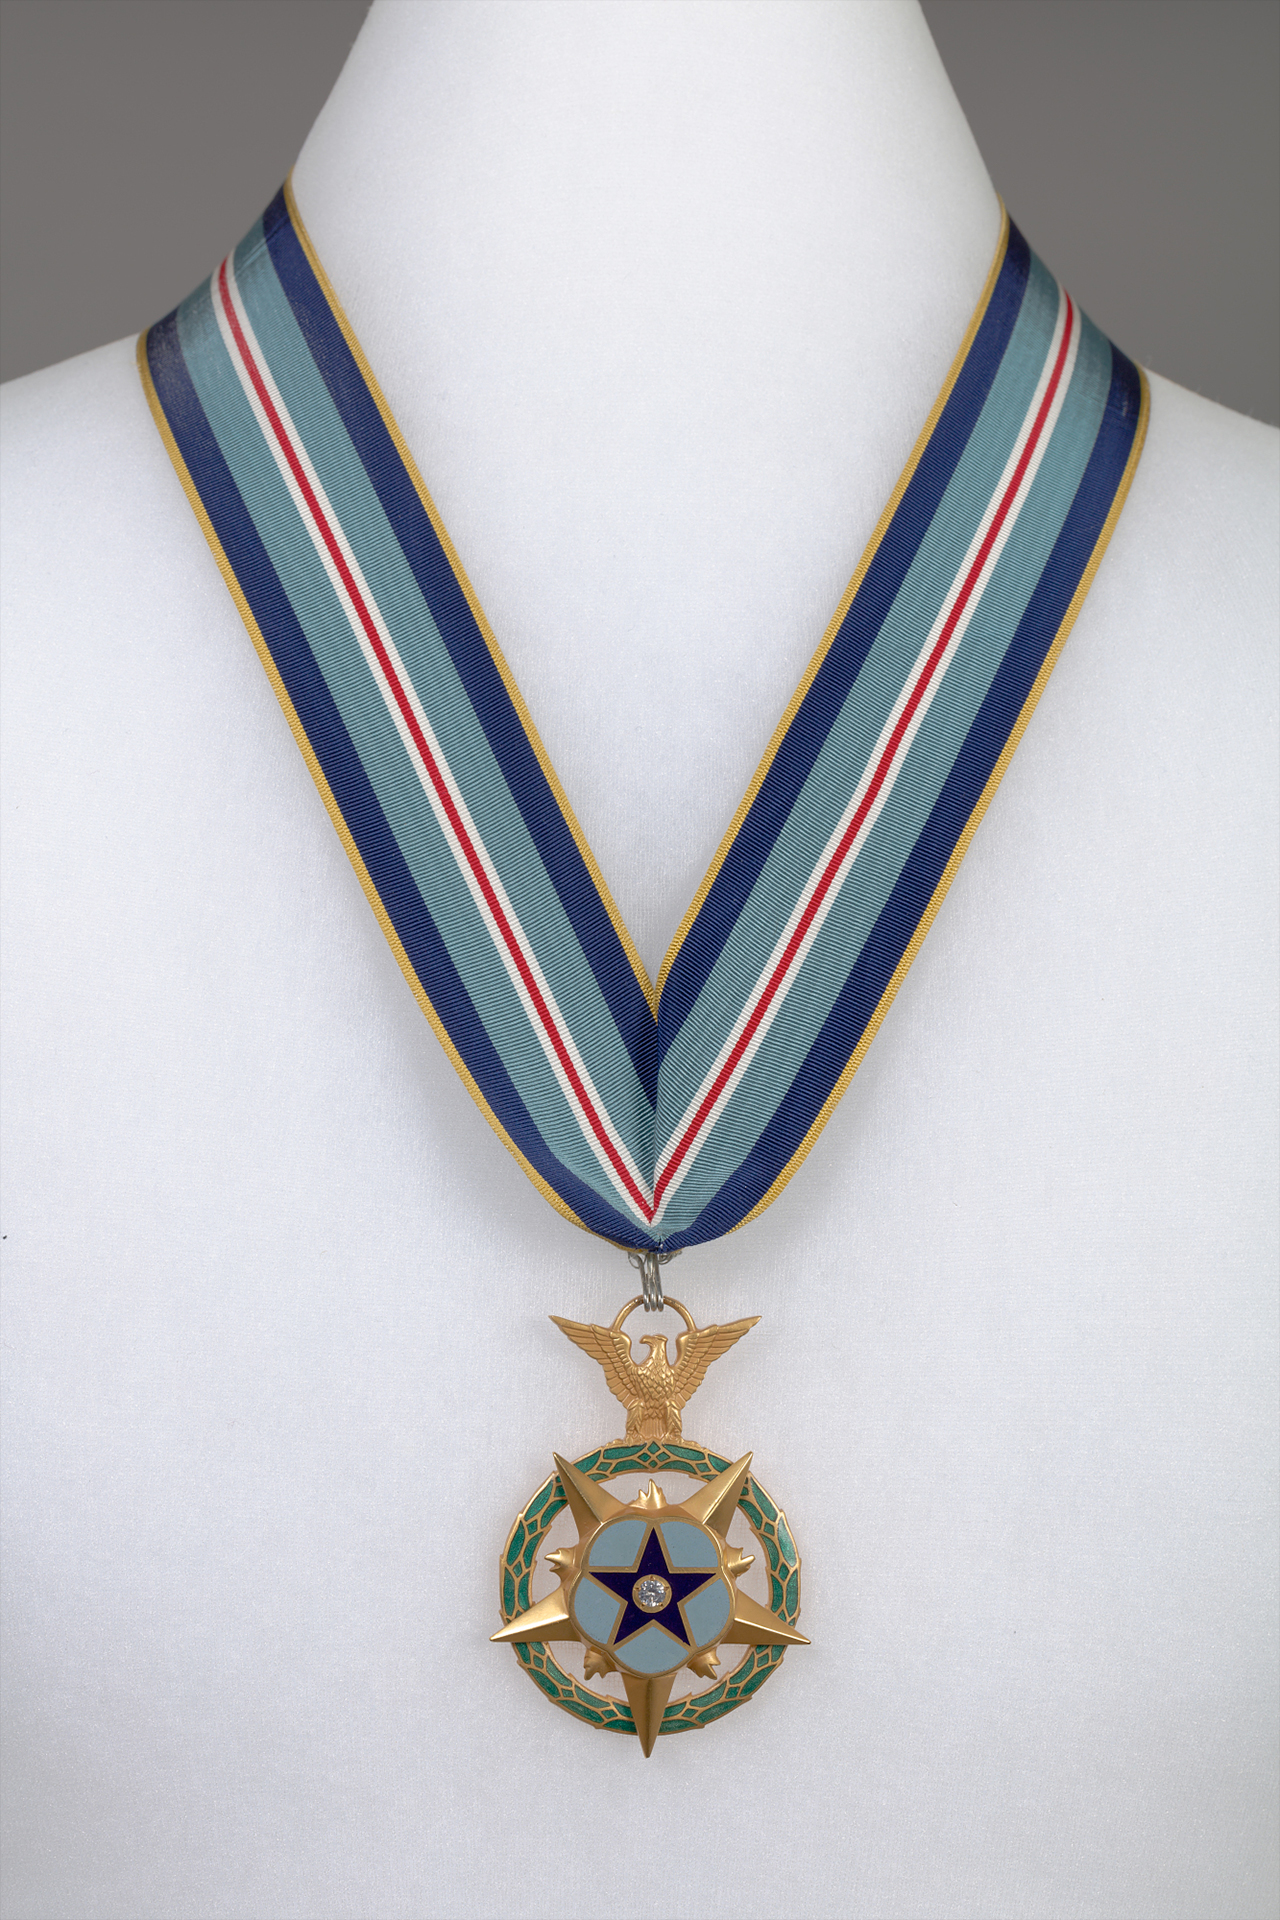 Example of the Congressional Space Medal of Honor as authorized by Congress in 1969 and first presented in 1978.